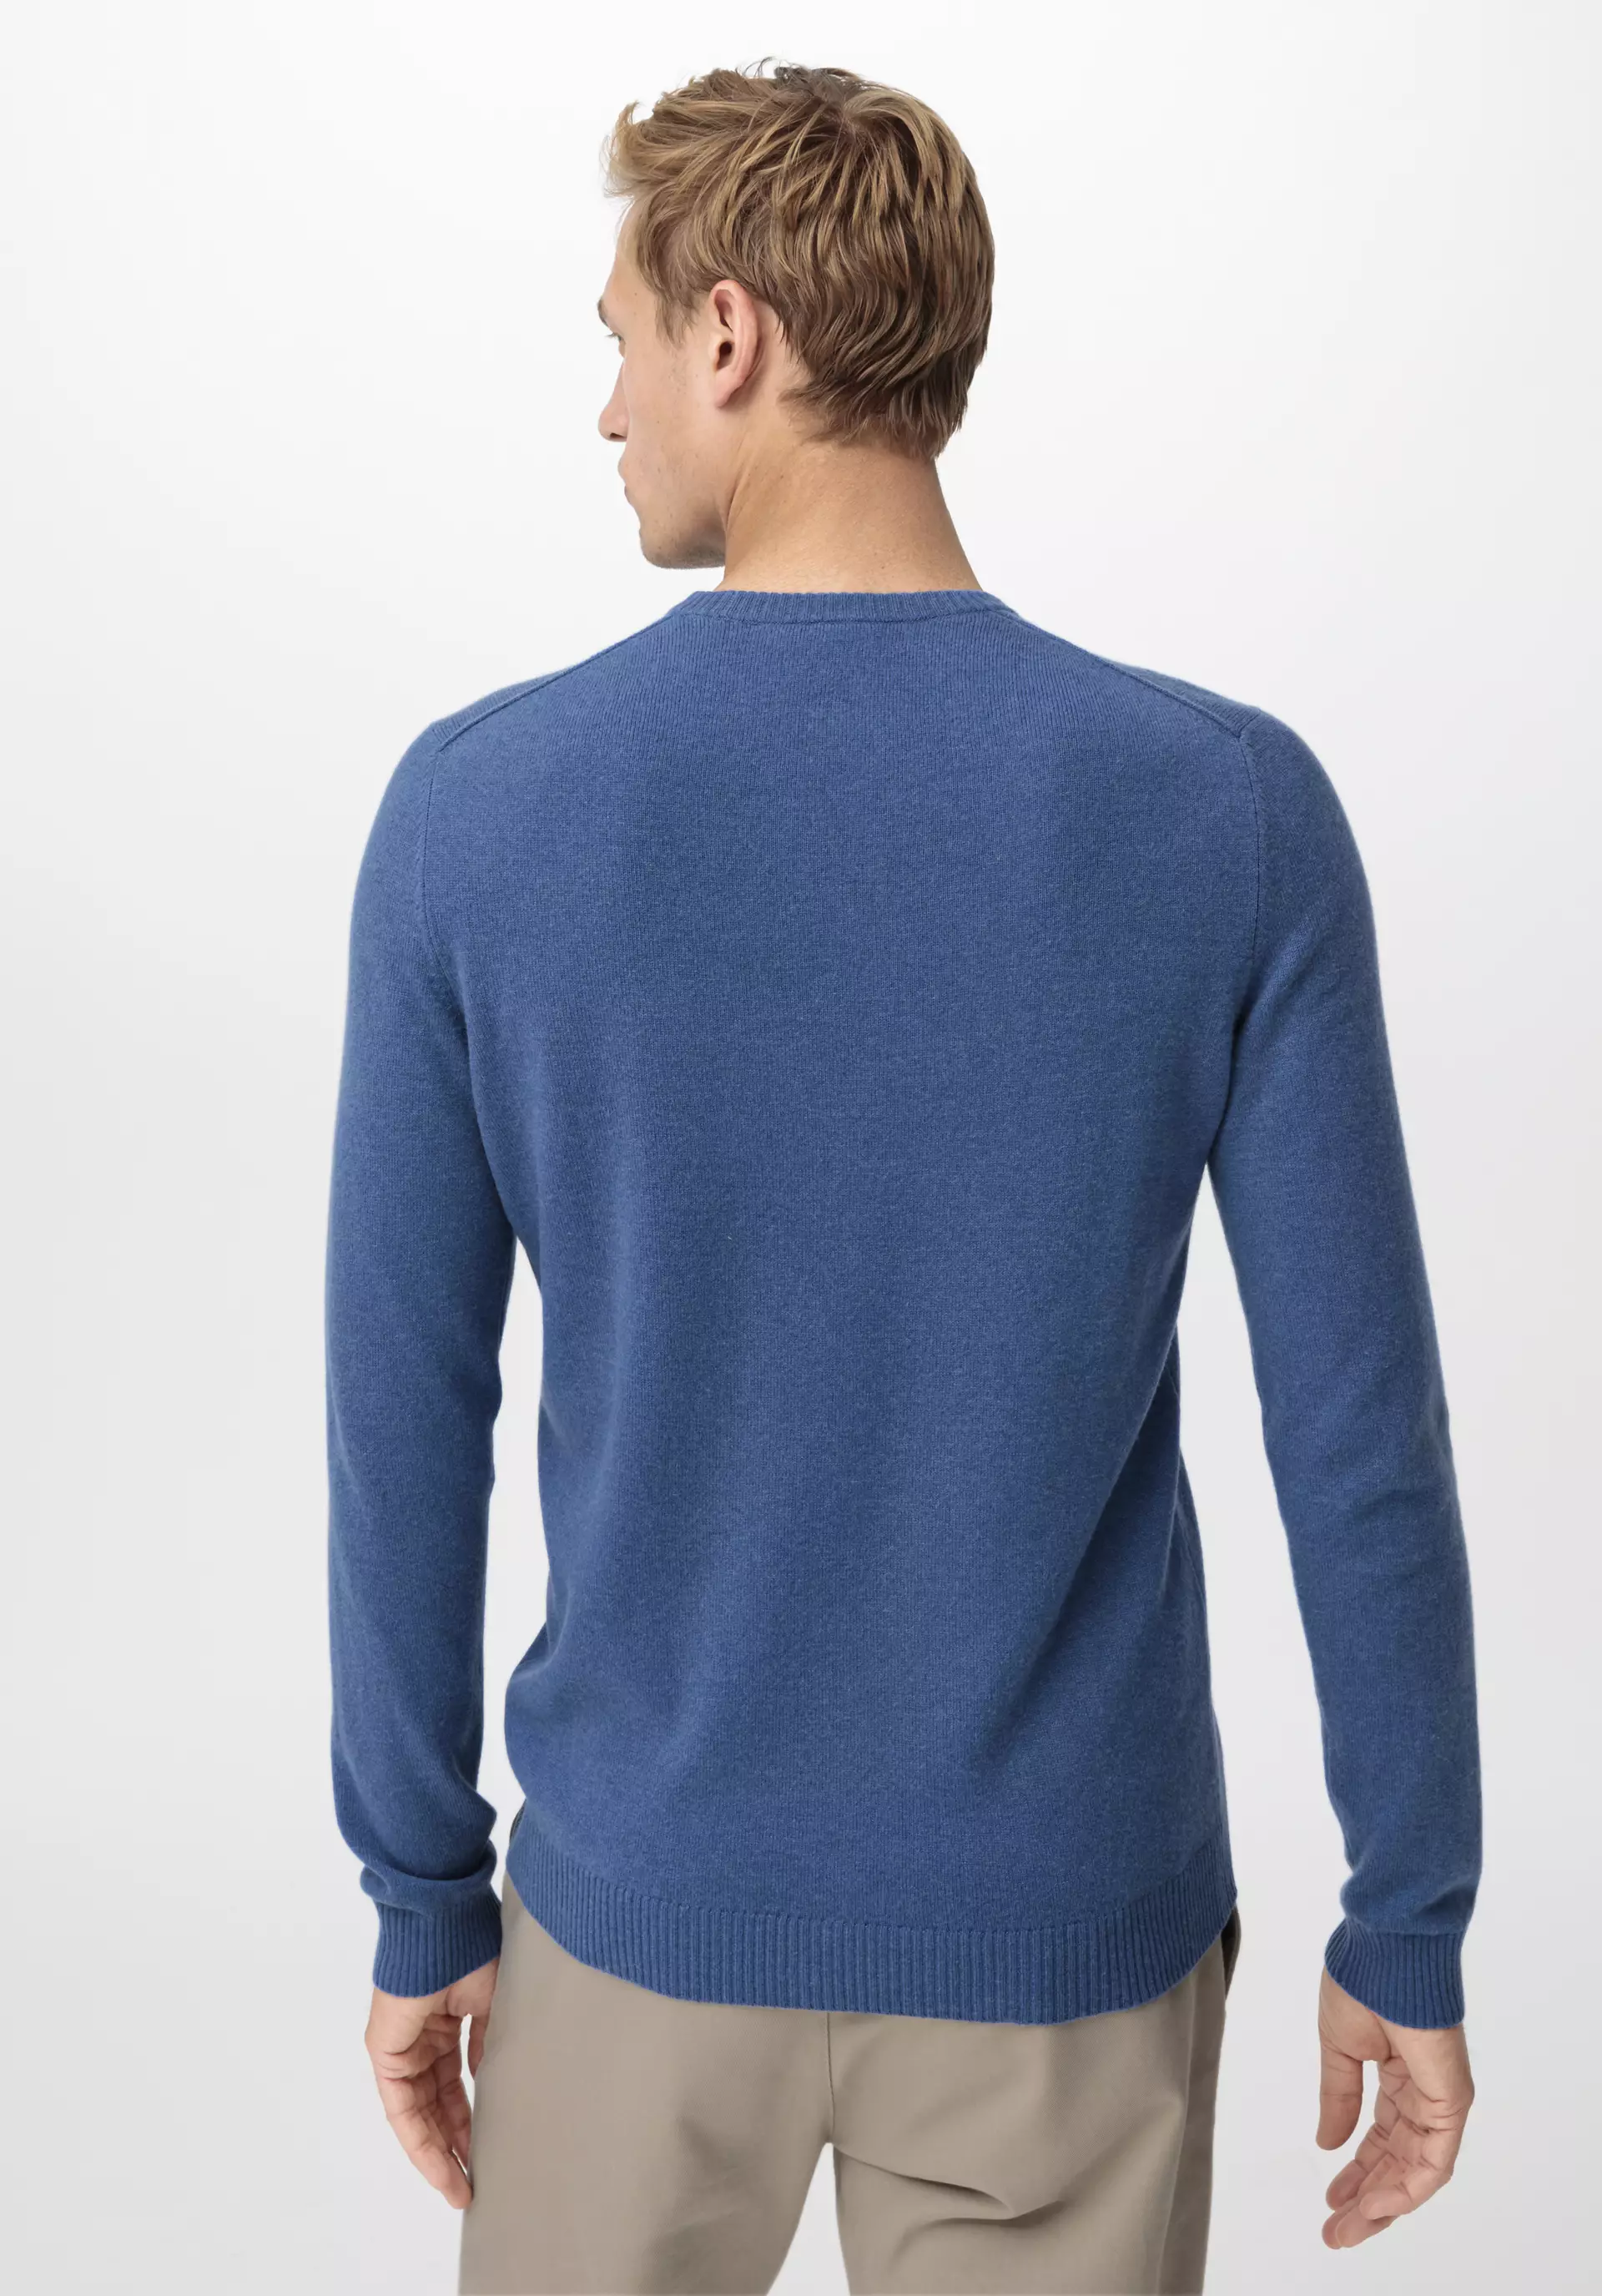 wool cashmere with 45822 Virgin sweater